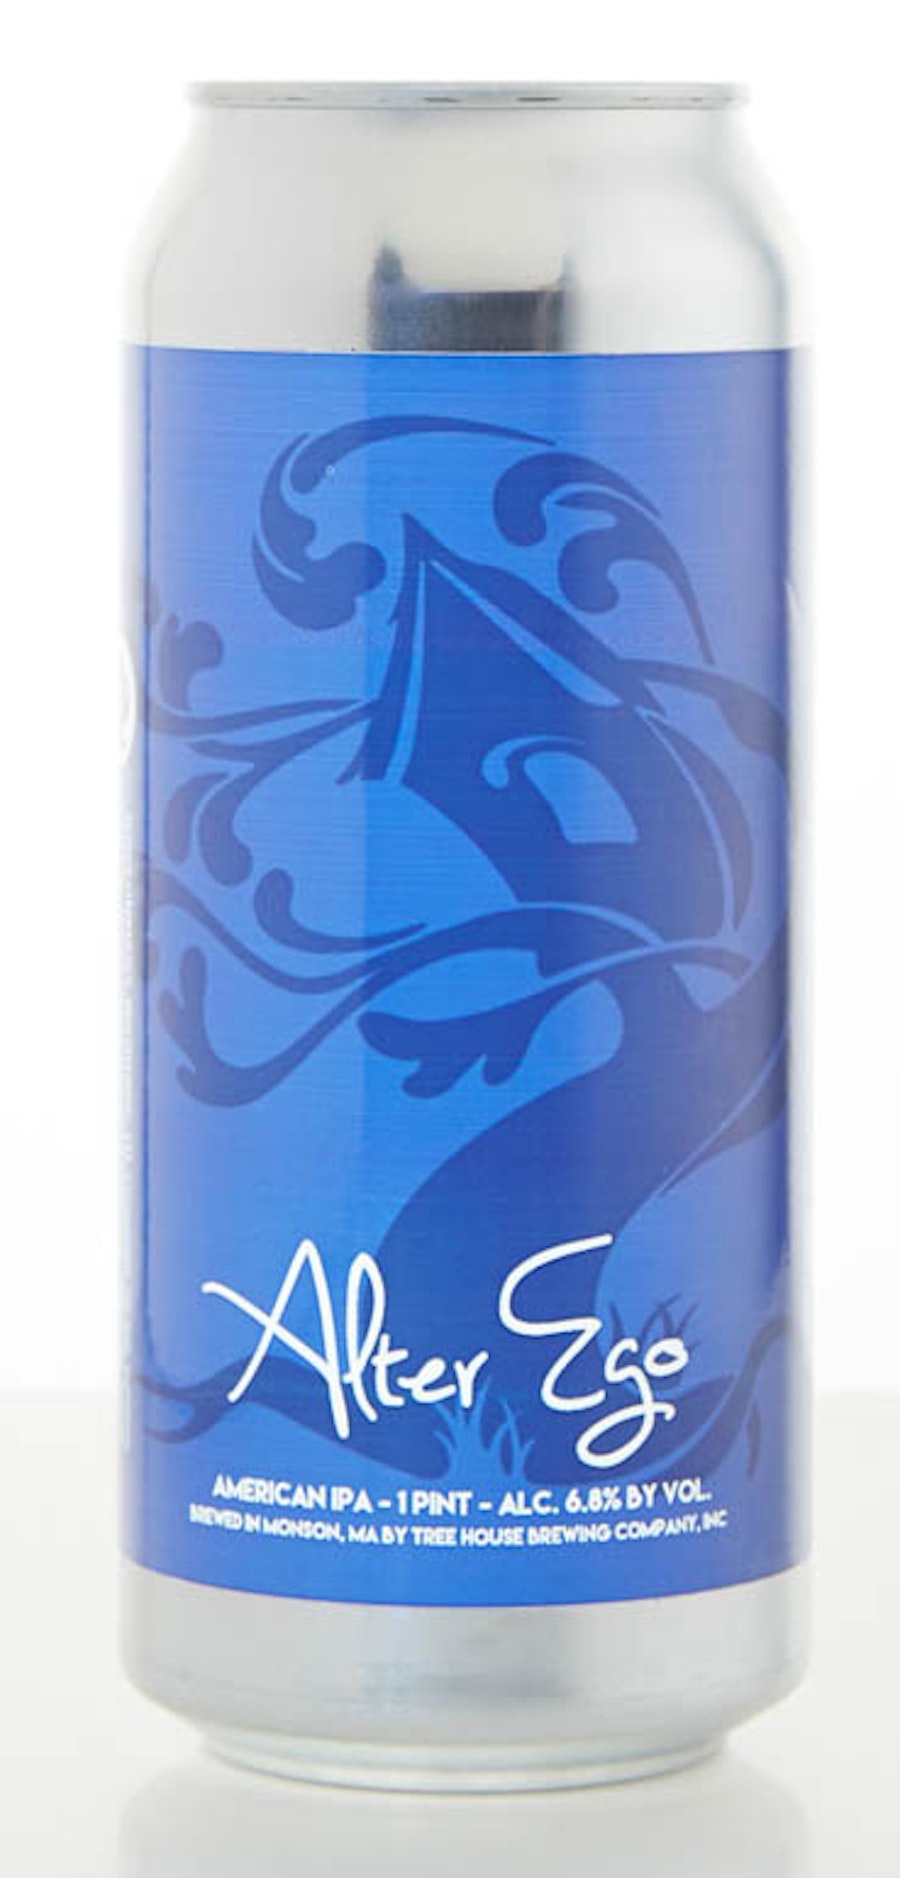 Tree House Brewing Company Alter Ego Review